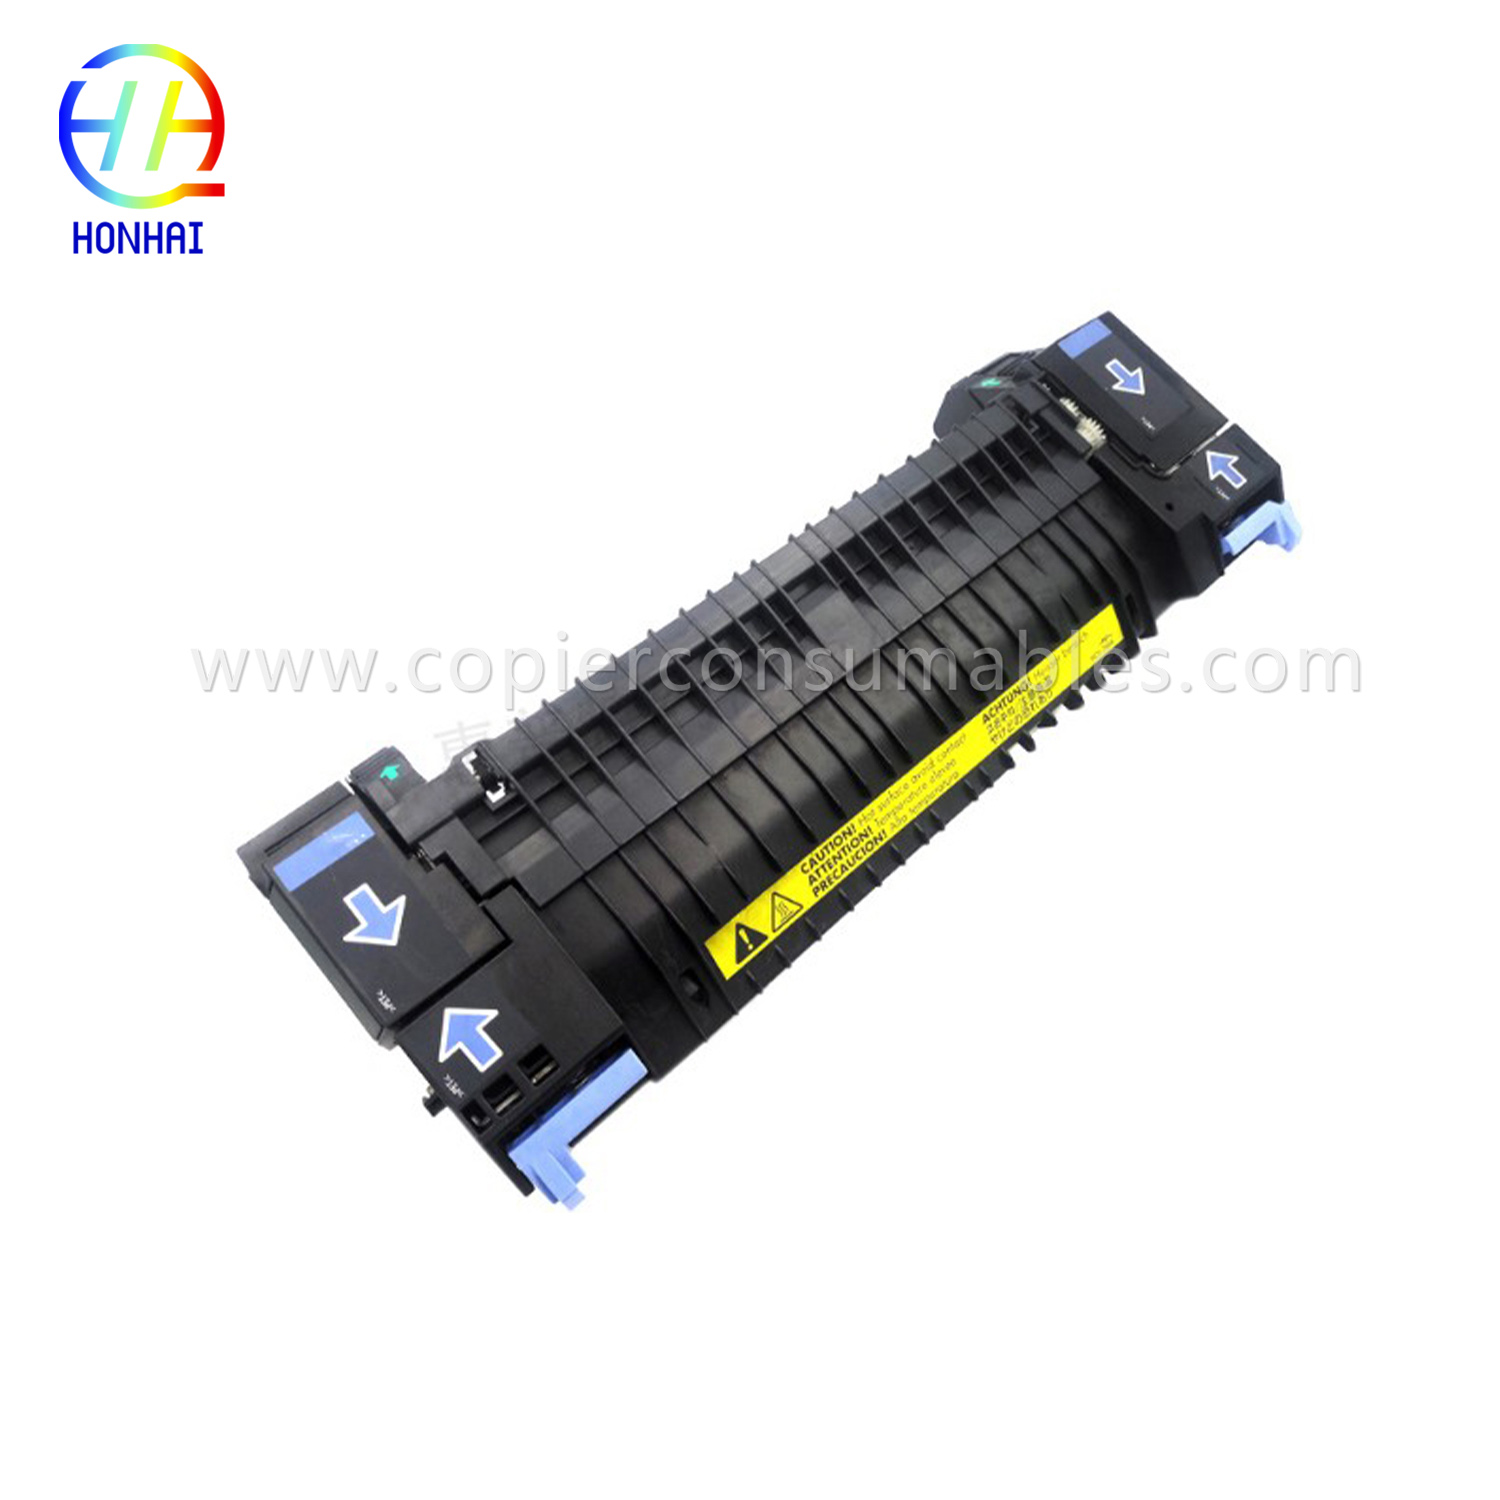 Fuser Assembly សម្រាប់ HP Color LaserJet 2700 3000 3600 3800 CP3505 RM1-4348 RM1-2763 RM1-2665